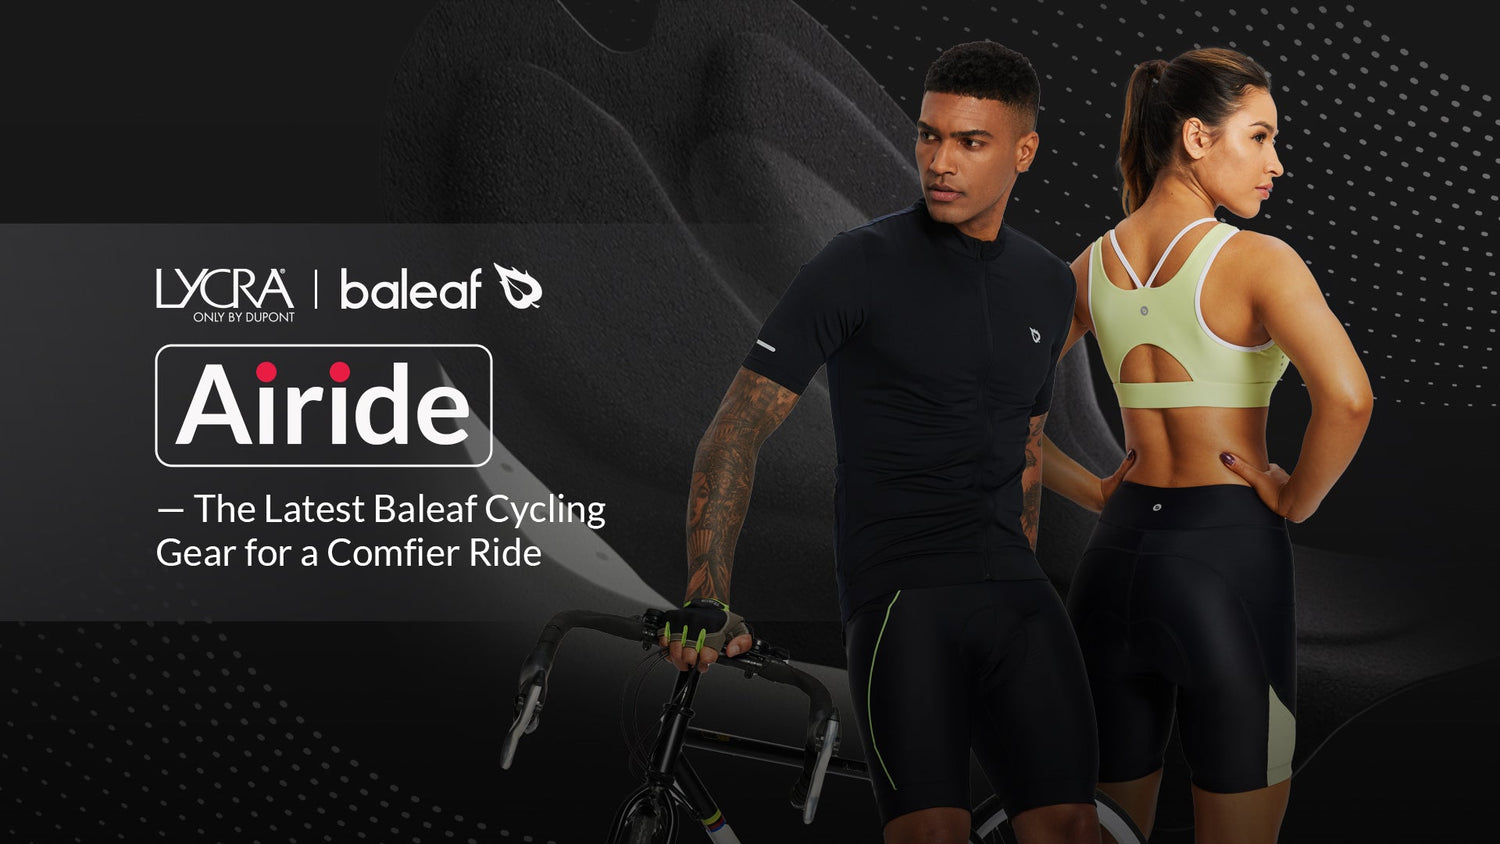 Airide — The Latest Baleaf Cycling Gear for a Comfier Ride